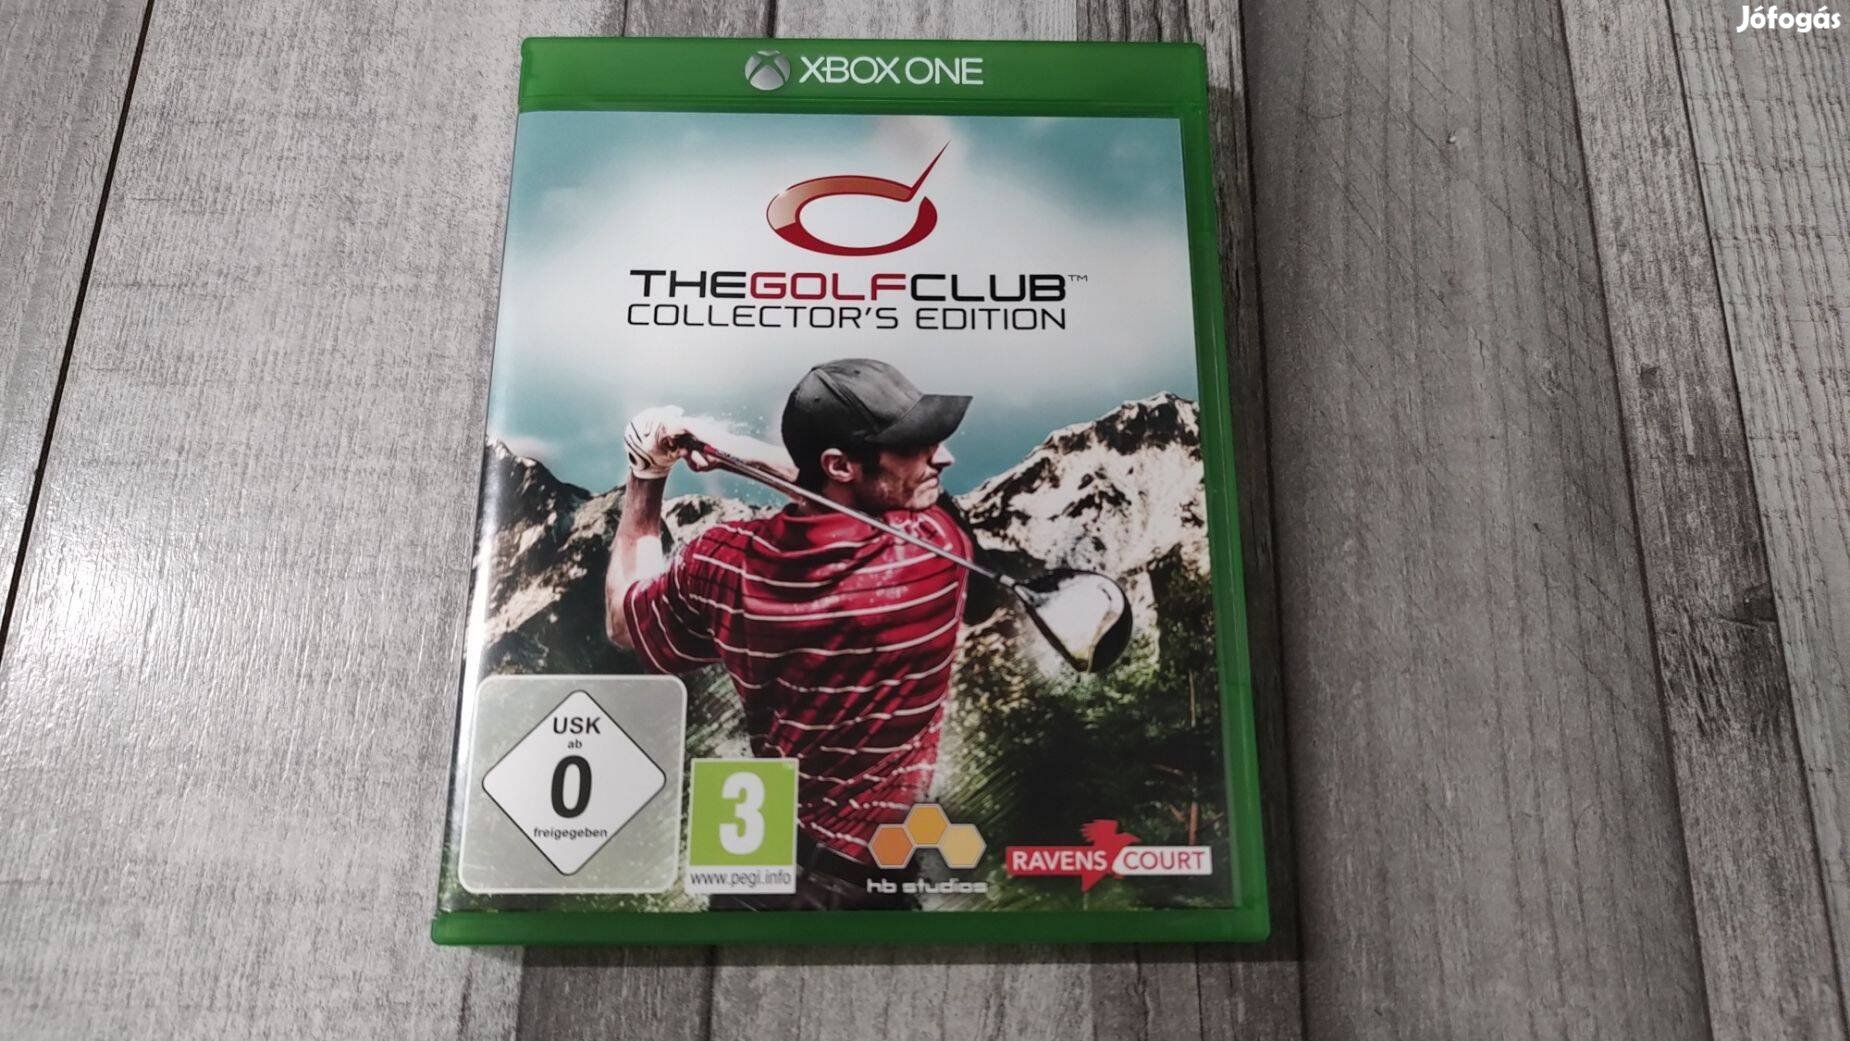 Xbox One(S/X)-Series X : The Golf Club Collector's Edition